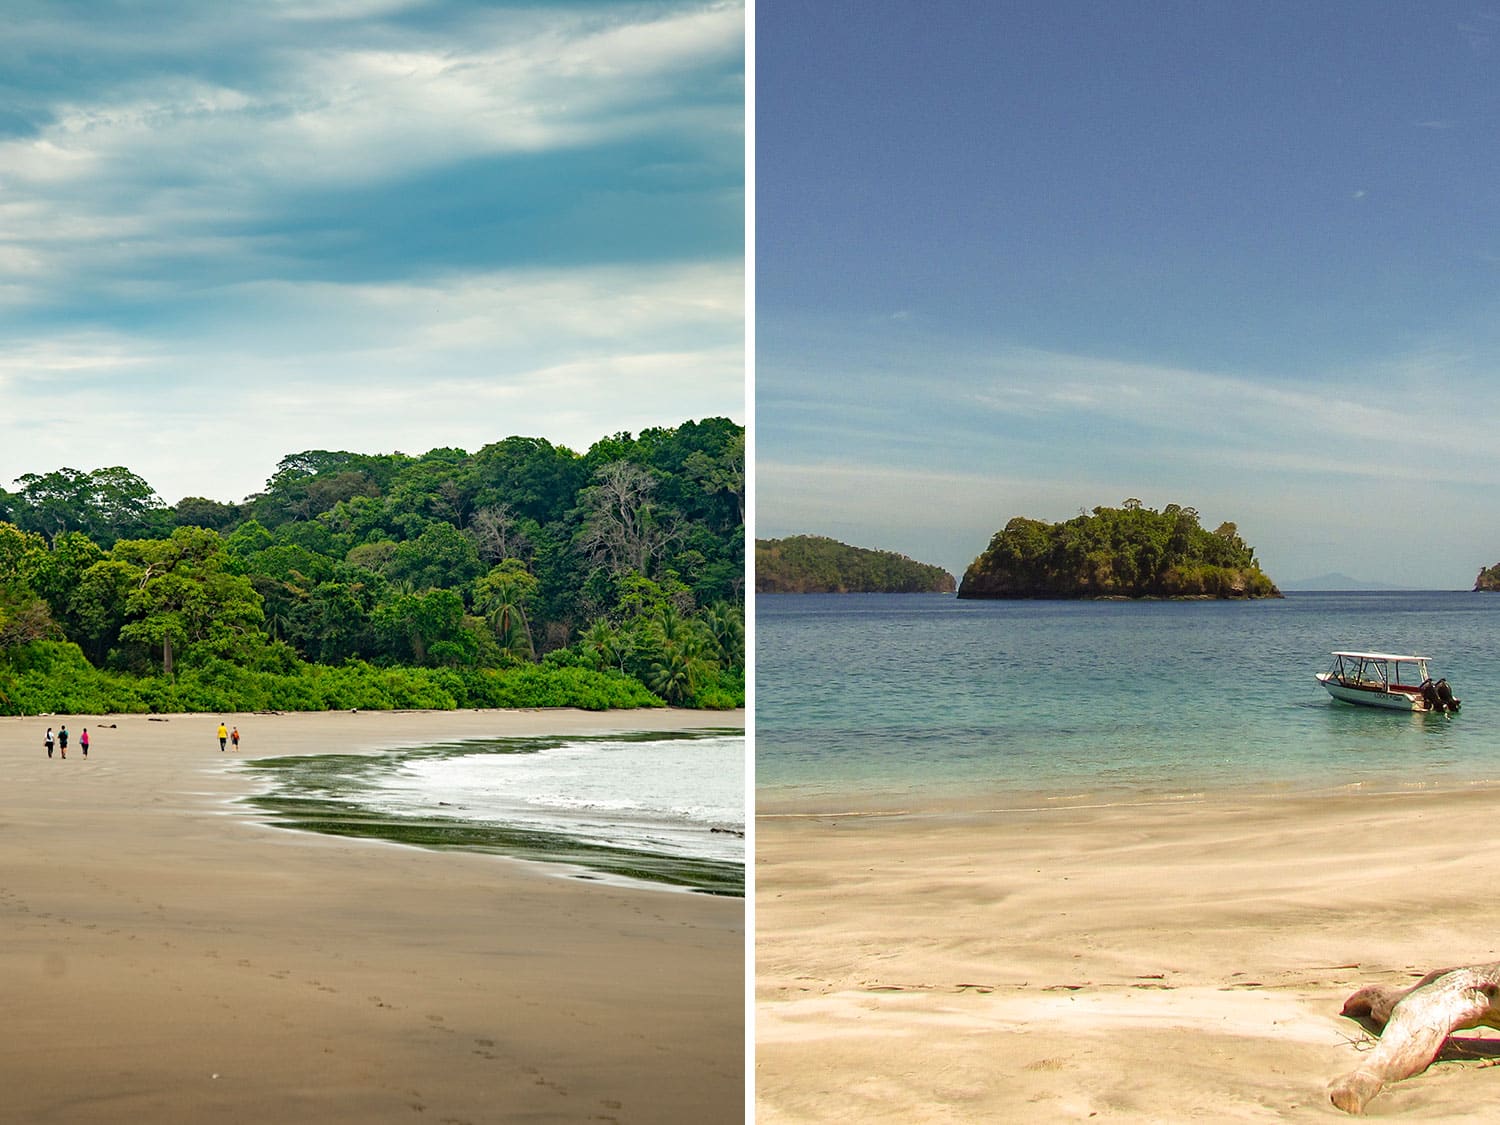 The beaches of Isla Palenque in Panama are ideal for walking tours, as guests will likely spot local wildlife.